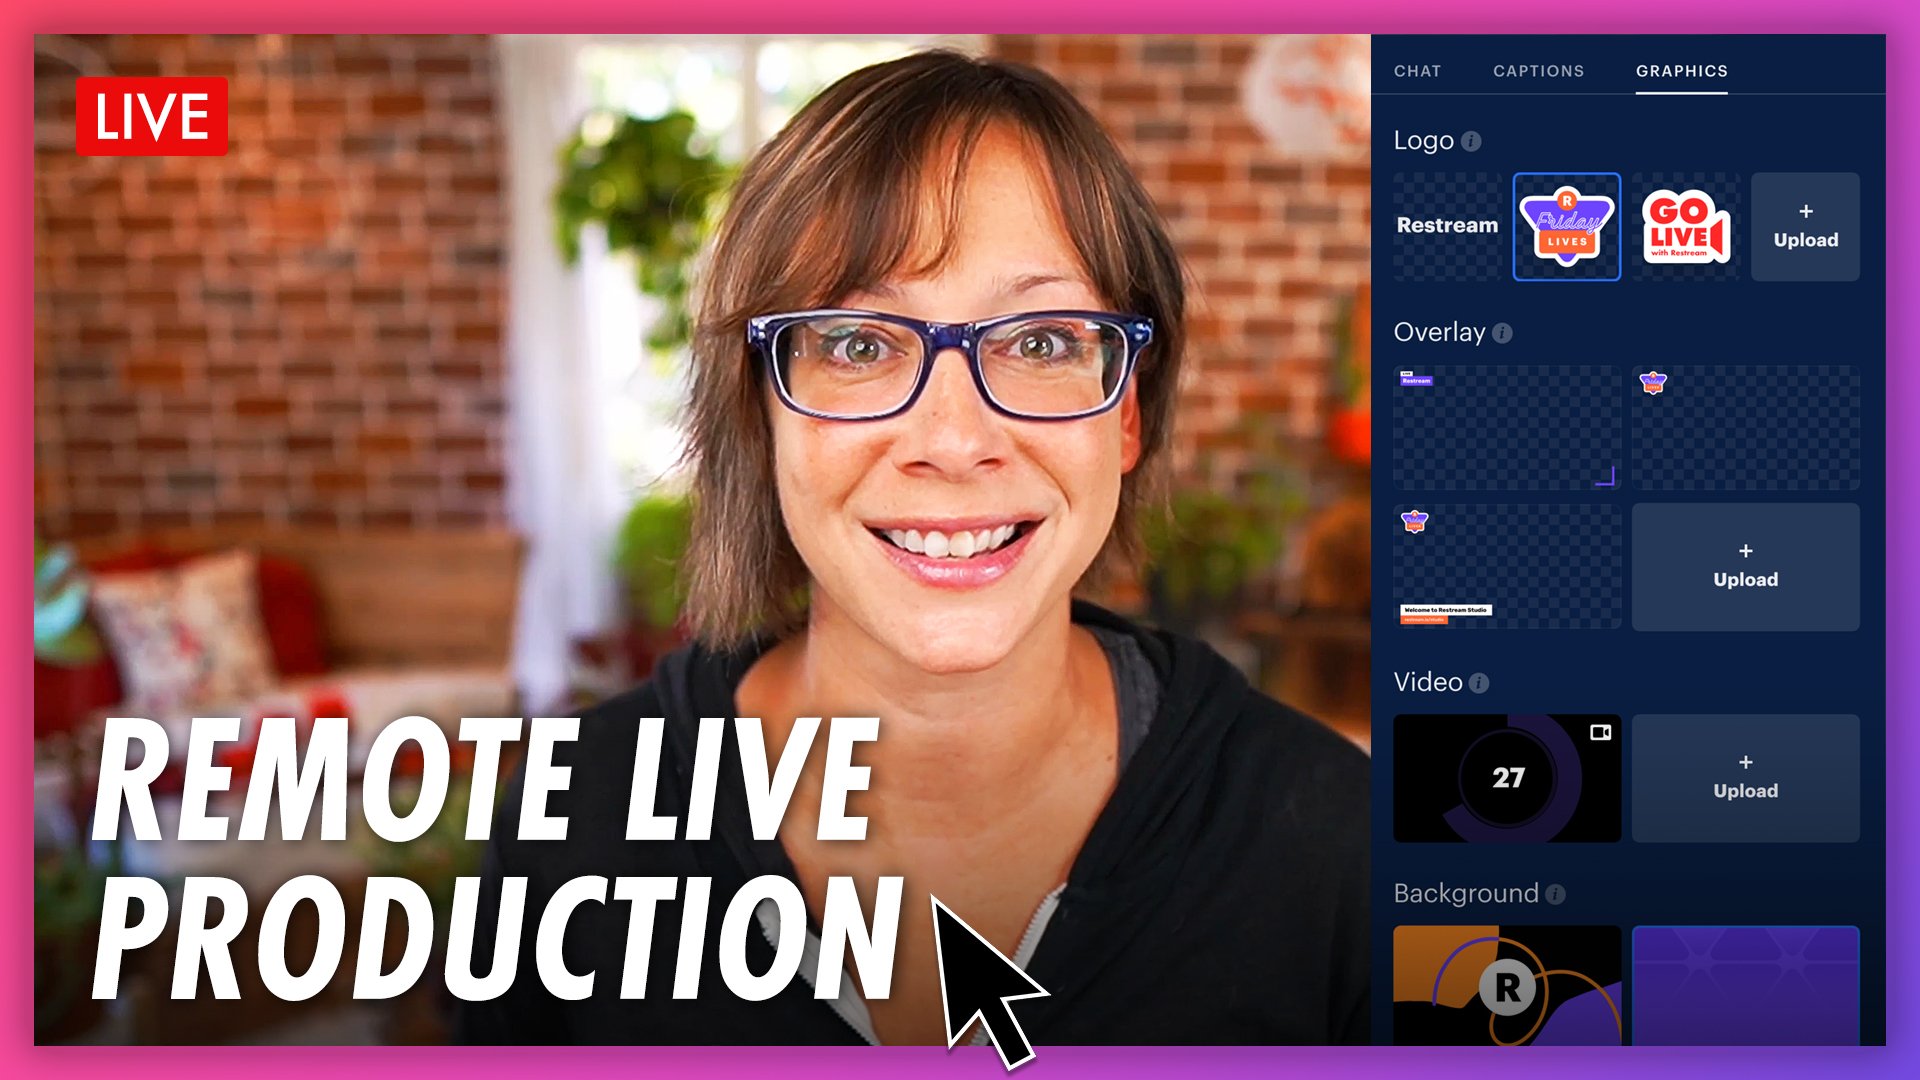 Remote Live Stream Production - HOW TO GET STARTED - Live Streaming Pros